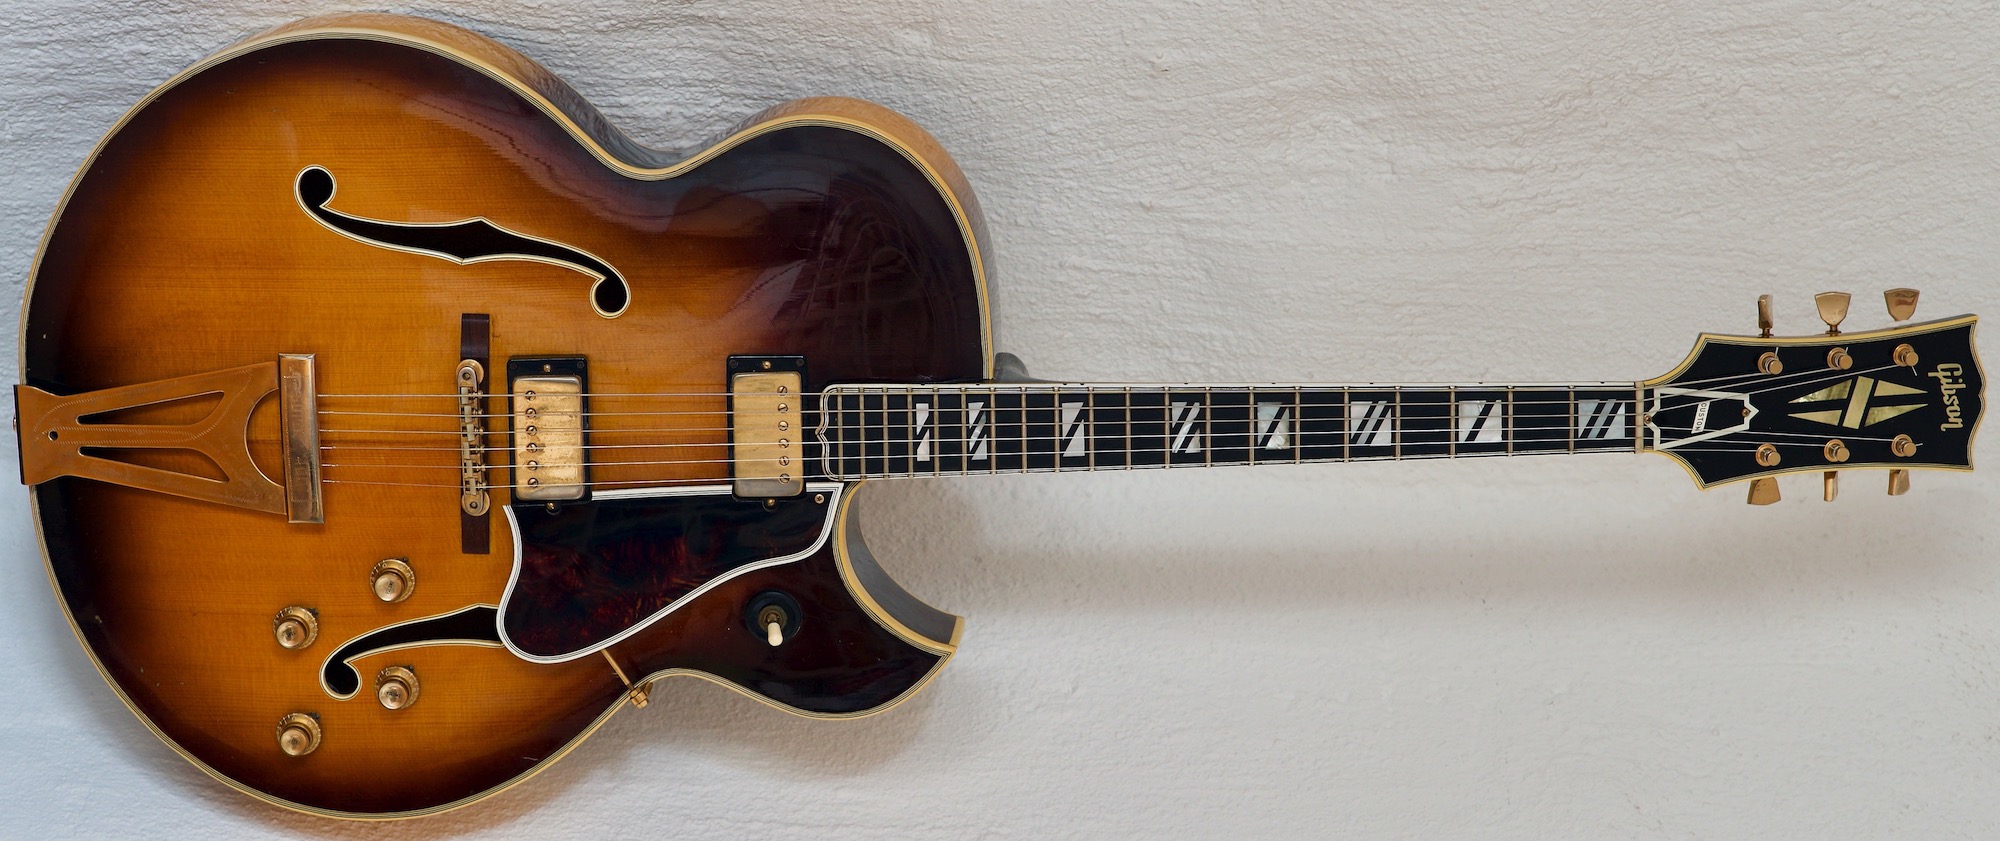 A Gibson Super 400 CES from 1967